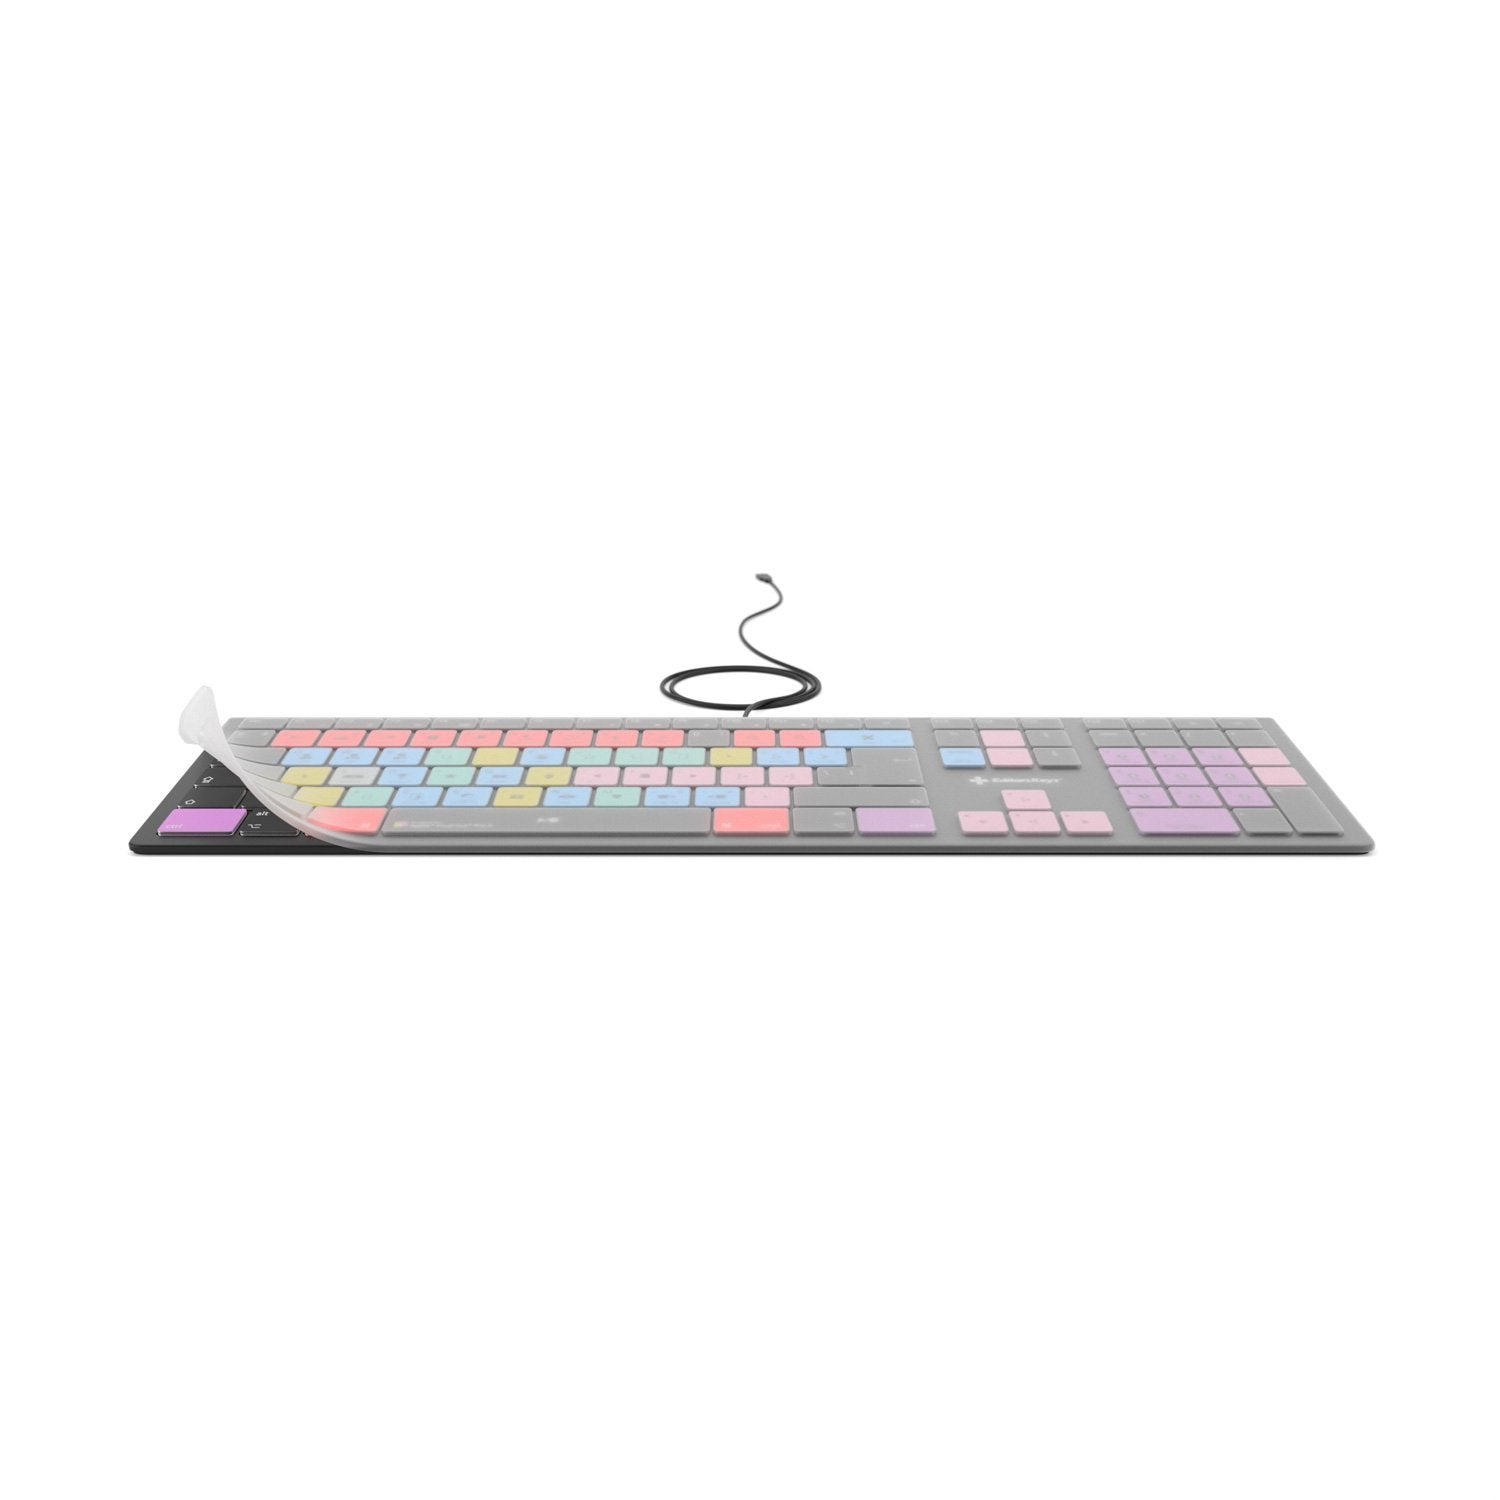 Clear Protection Cover for Backlit Keyboard - Editors Keys